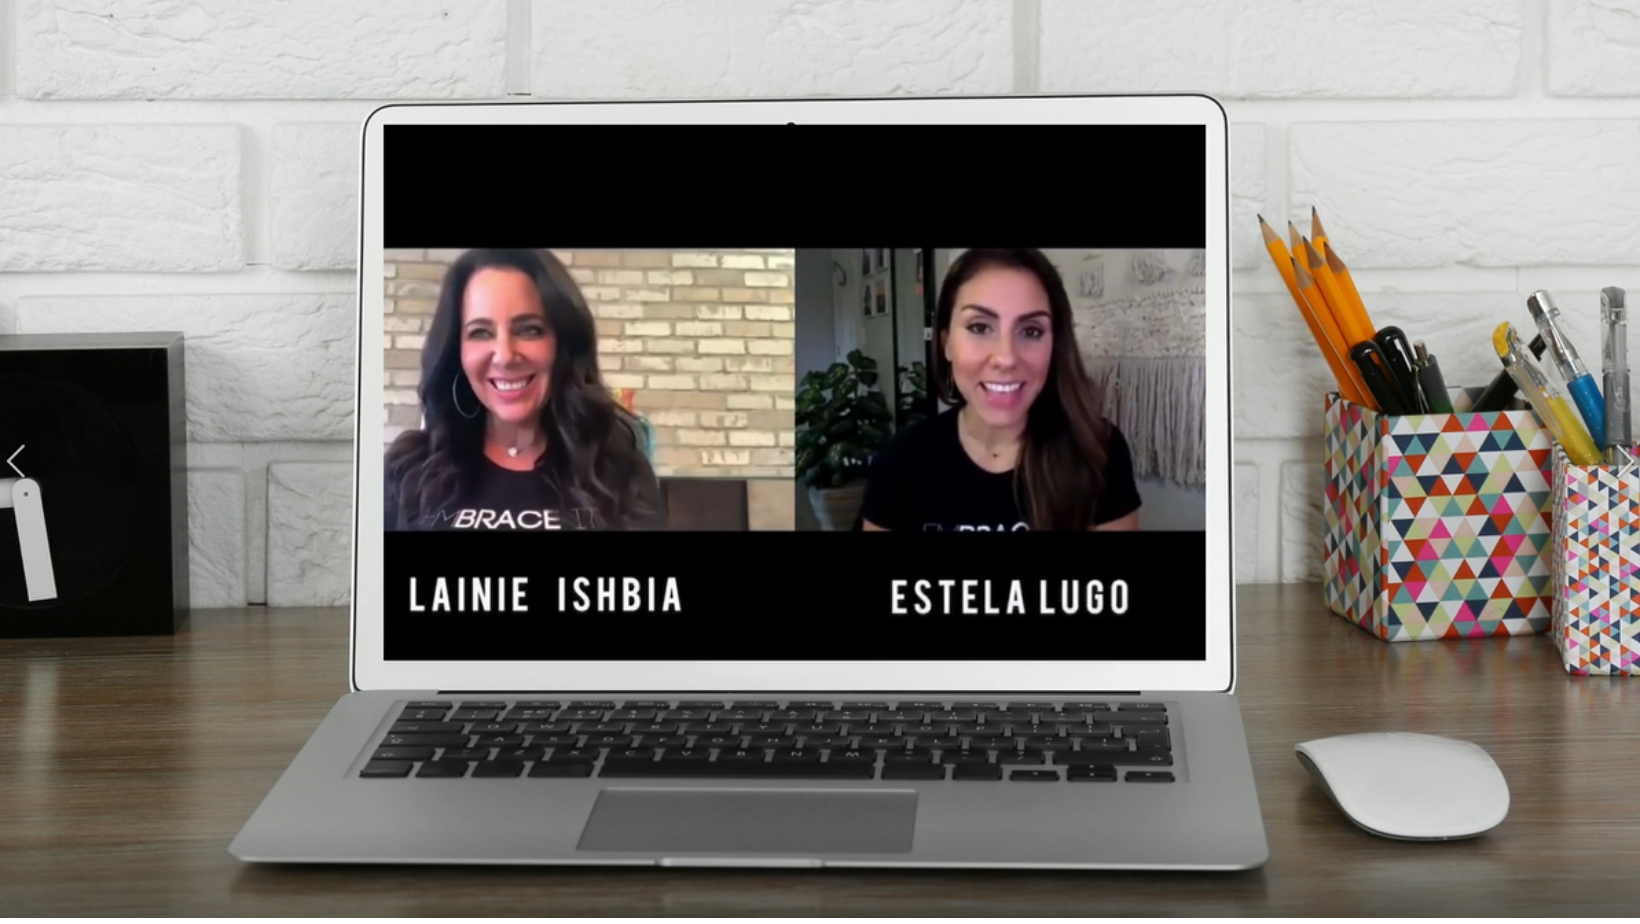 Photo of a silver laptop sitting on a dark wood desk with a virtual meeting screen showing Lainie Ishbia and Estela Lugo side-by-side with their names displayed below. begind the laptop is a white painted brick wall and colorful, geometric printed pencil boxes holding pencils and pens. A white computer mouse sits on the right side of the laptop.